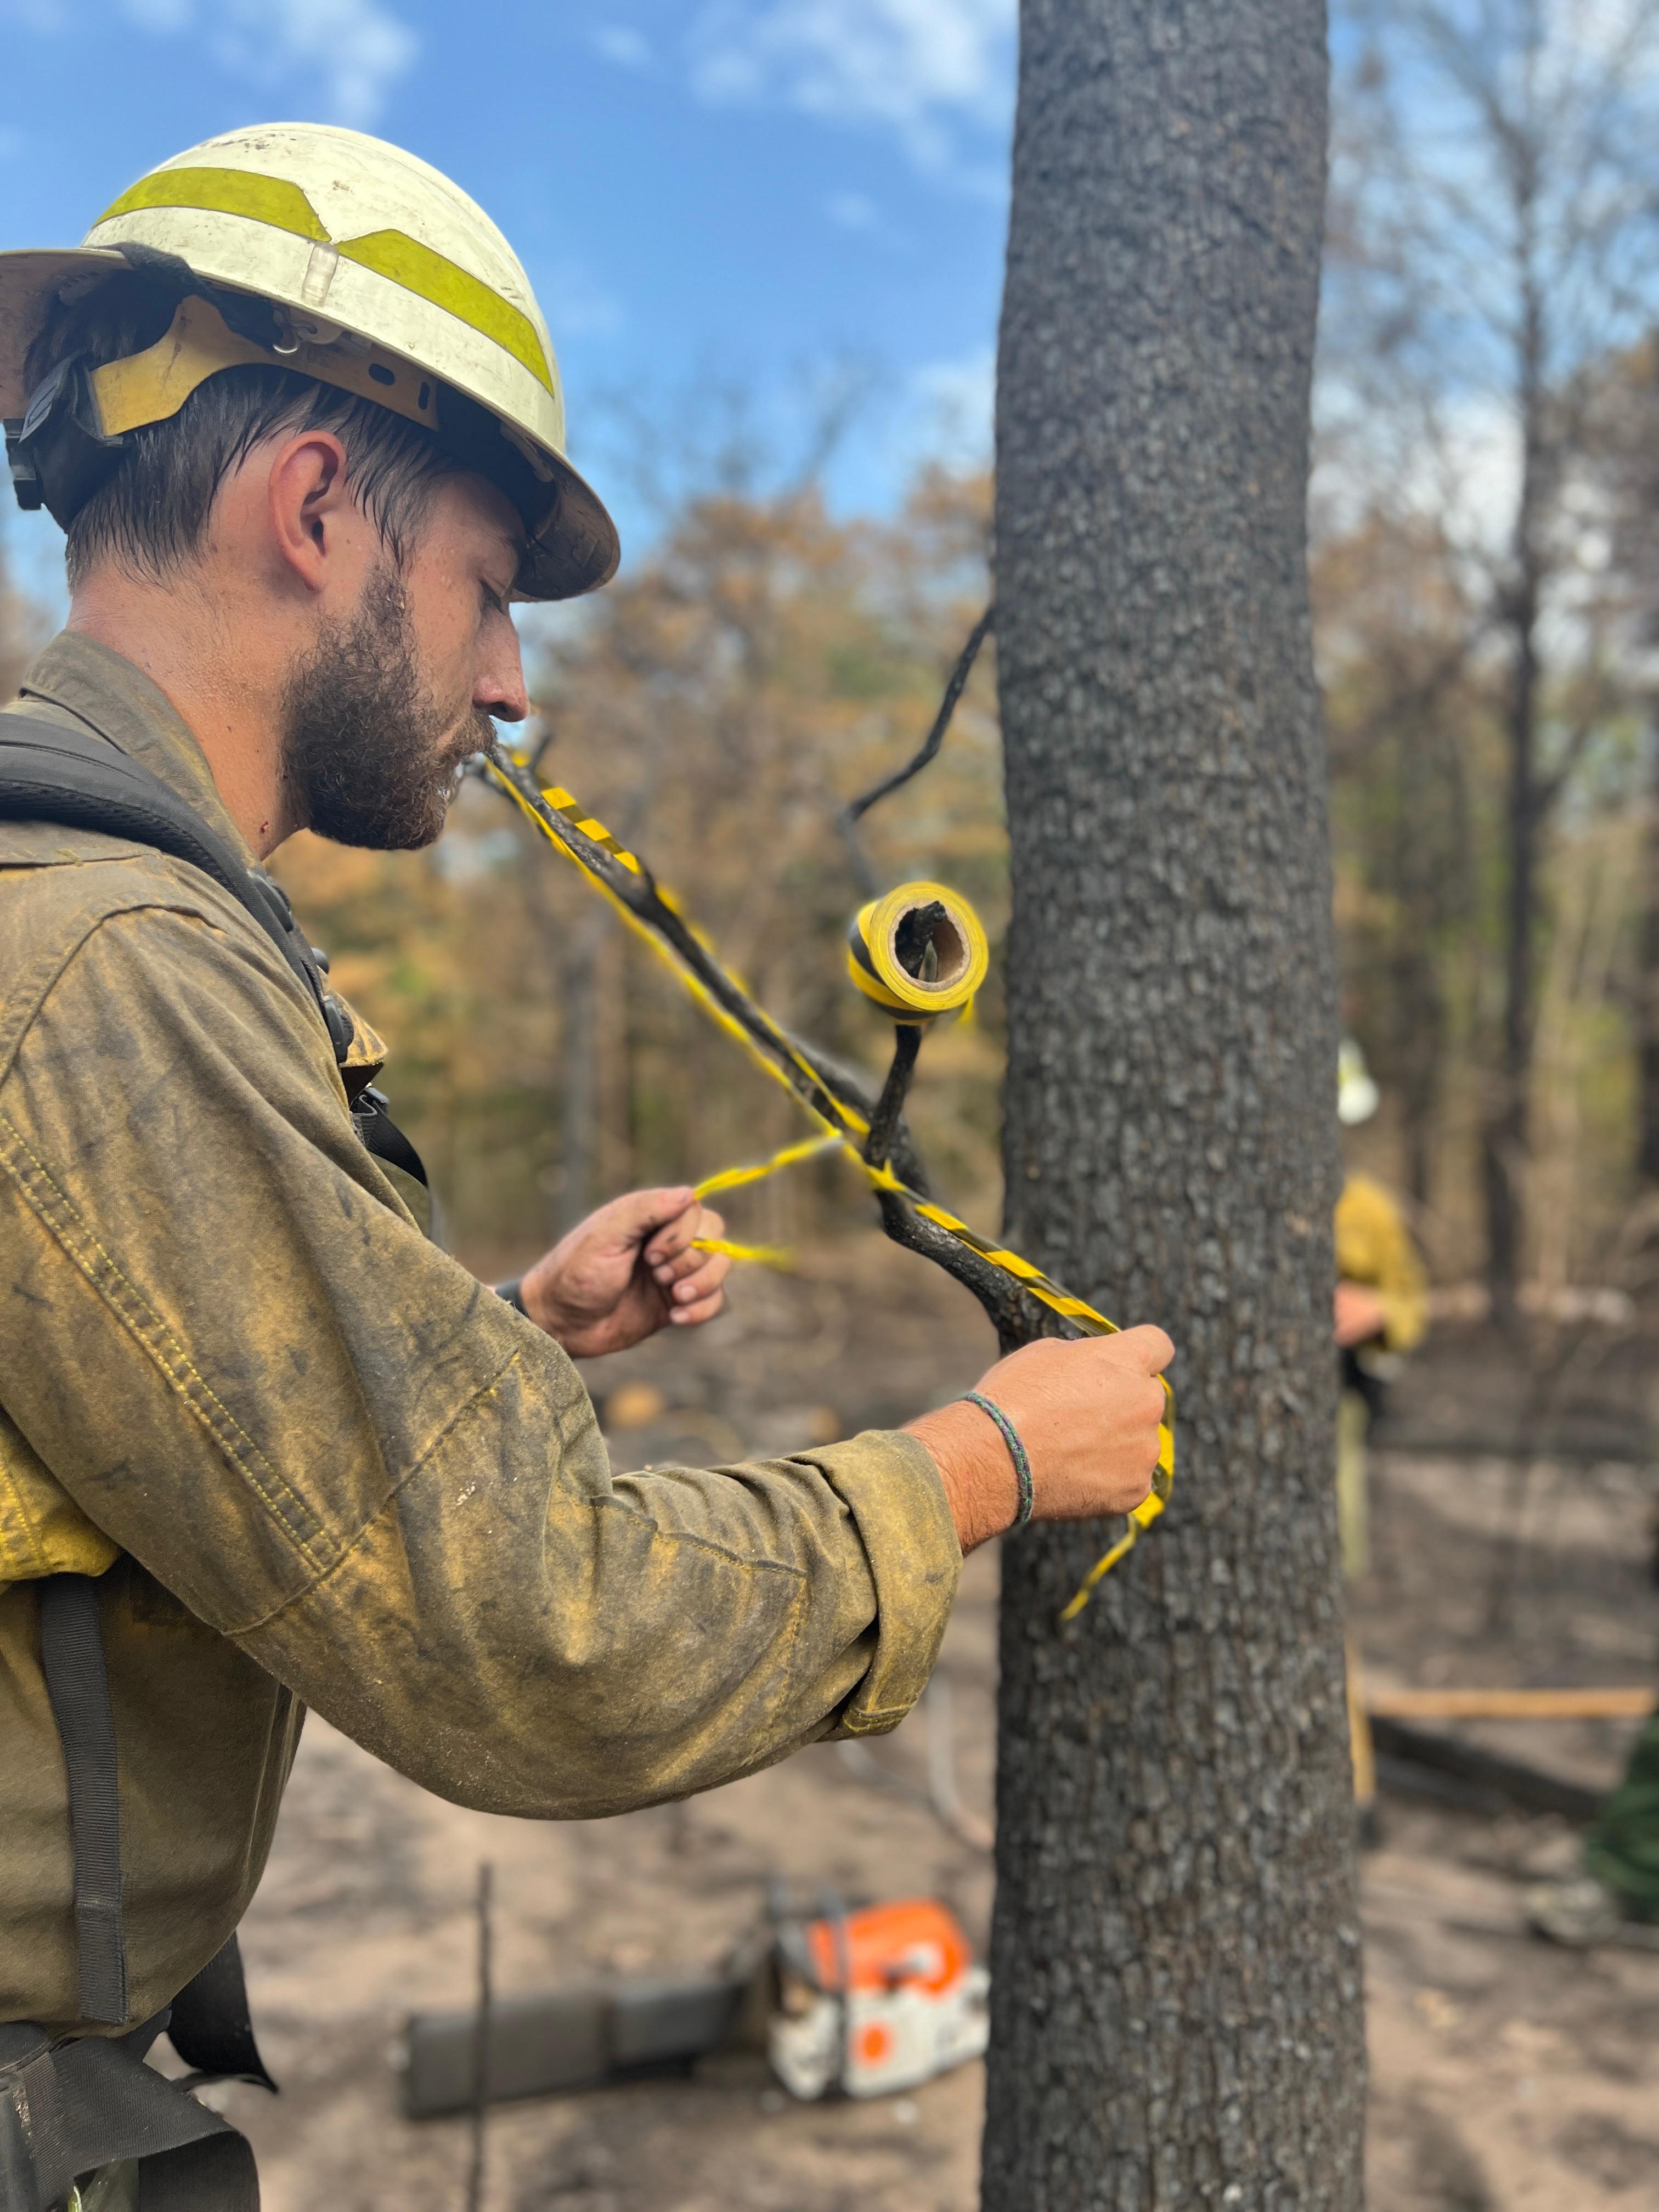 Firefighter ties a yellow and black striped ribbon on a burned tree classified as hazard